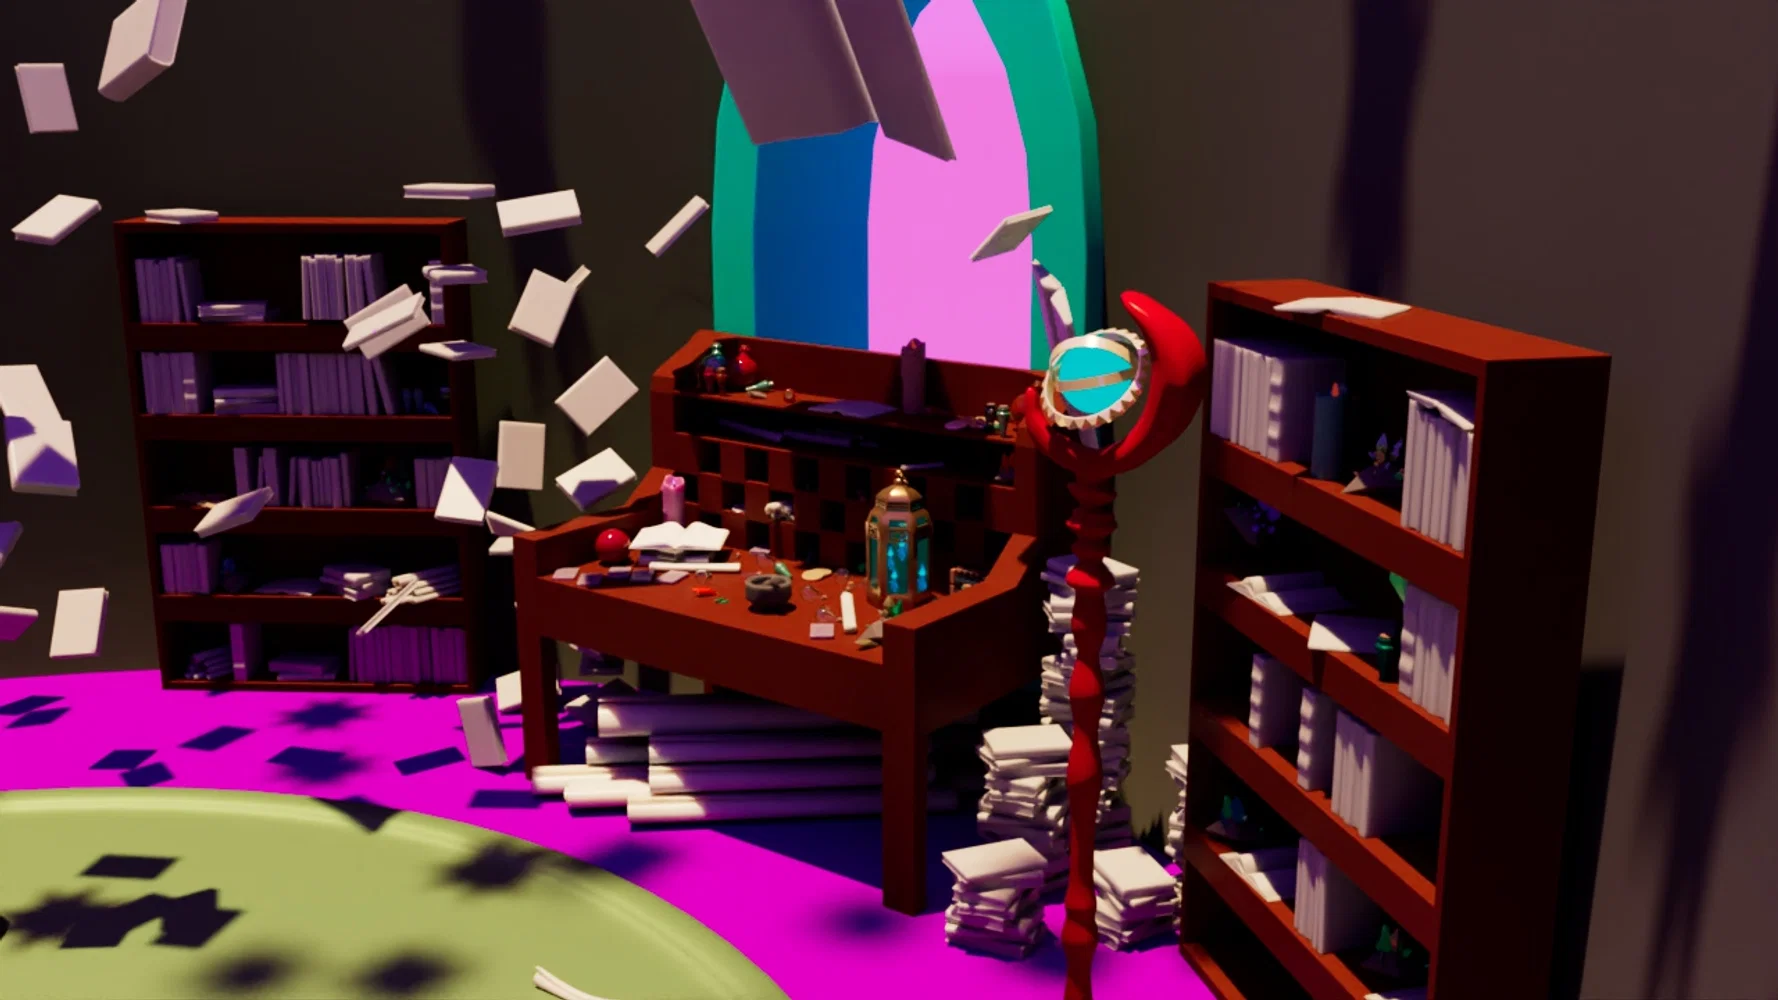 An image from my senior project of modeling and decorating a magical room in a wizards tower. This specifically captures the wizards desks, shelves and staff, thought the books still need textures. 